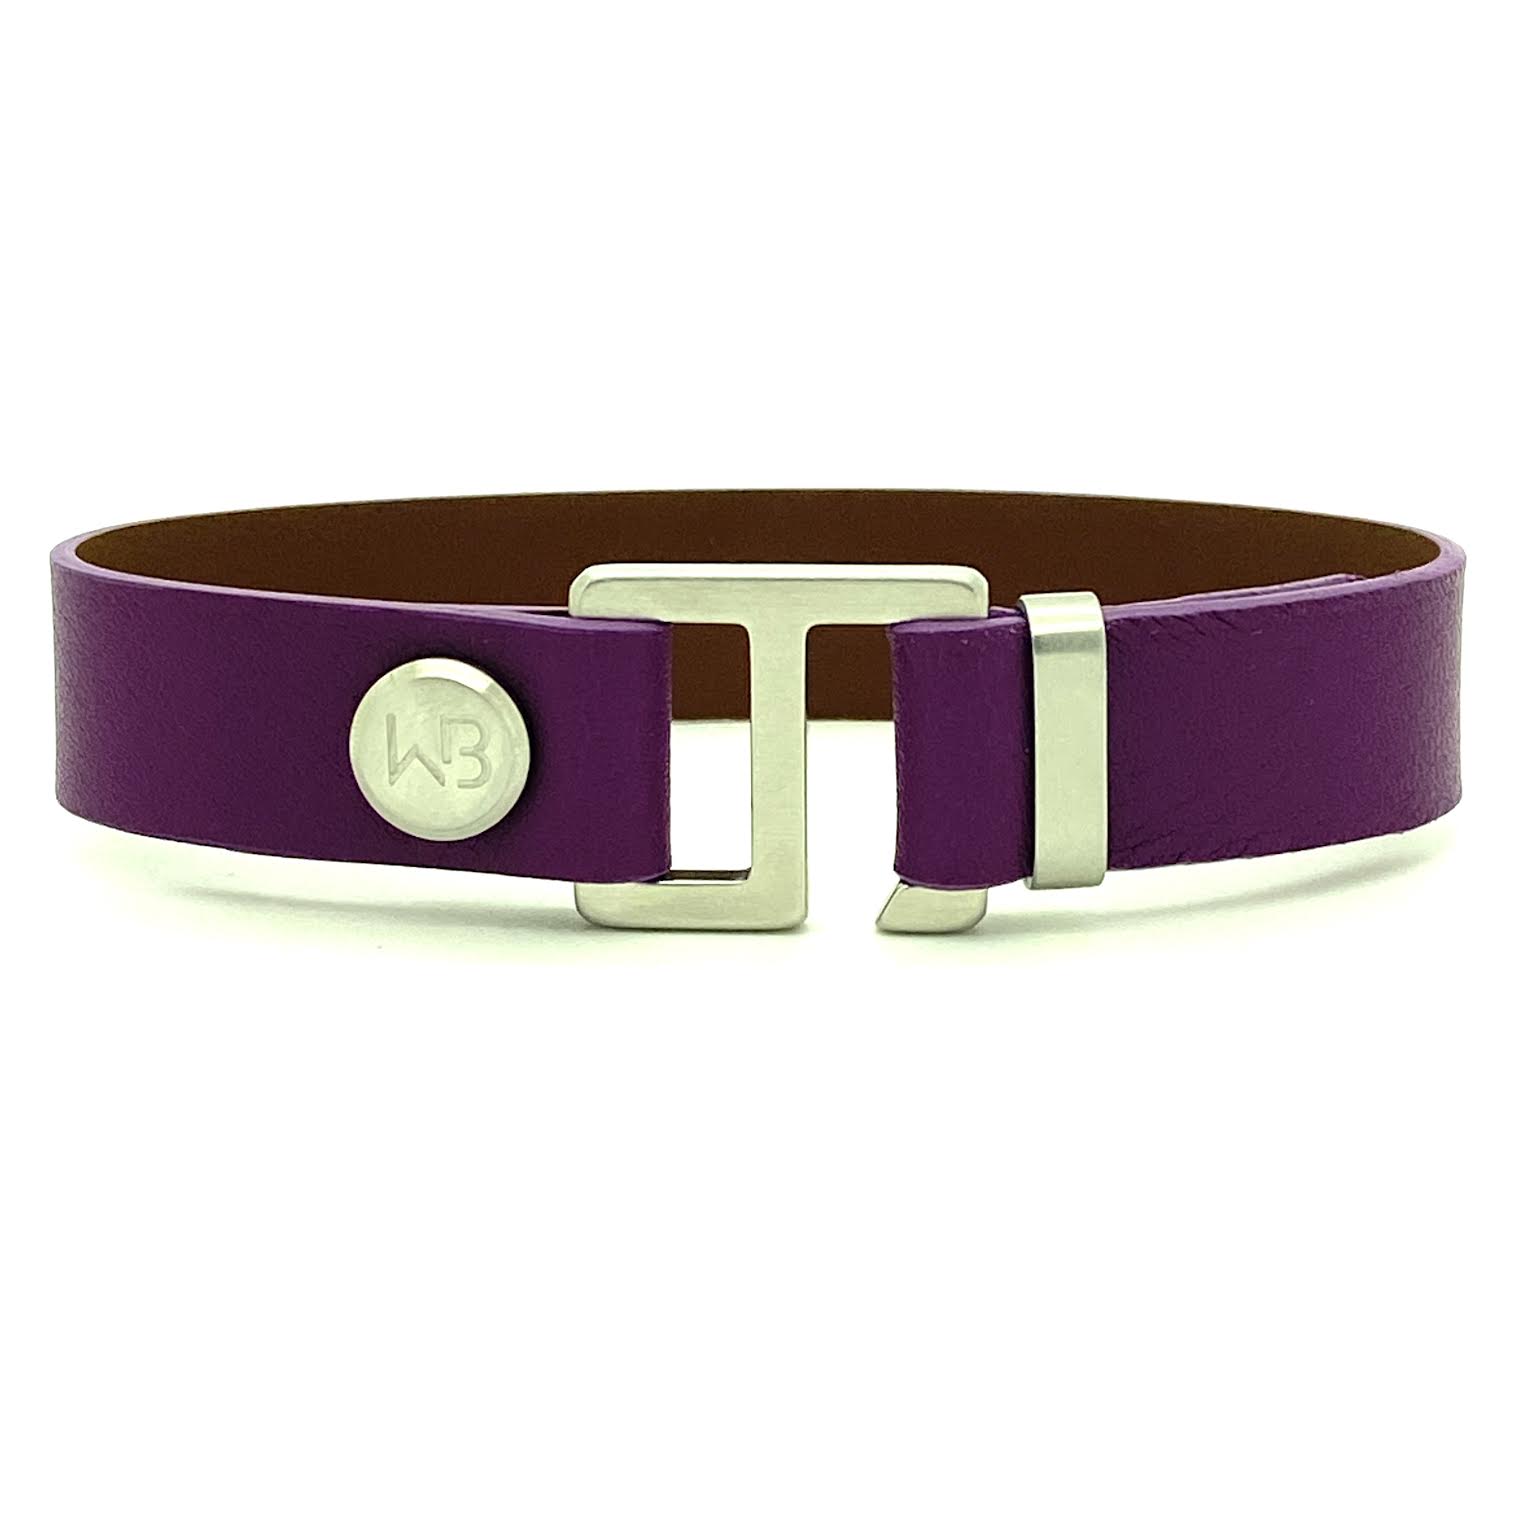 Our striking Anemone Italian leather cuff bracelet is paired perfectly with our artisan designed, lightly brushed hardware.  Your hardware choices include Rose Gold, Yellow Gold, Stainless Steel and Black Ceramic. This adjustable size bracelet is a distinctive piece worn alone or with a WristBend stacking bracelet. Made by WristBend